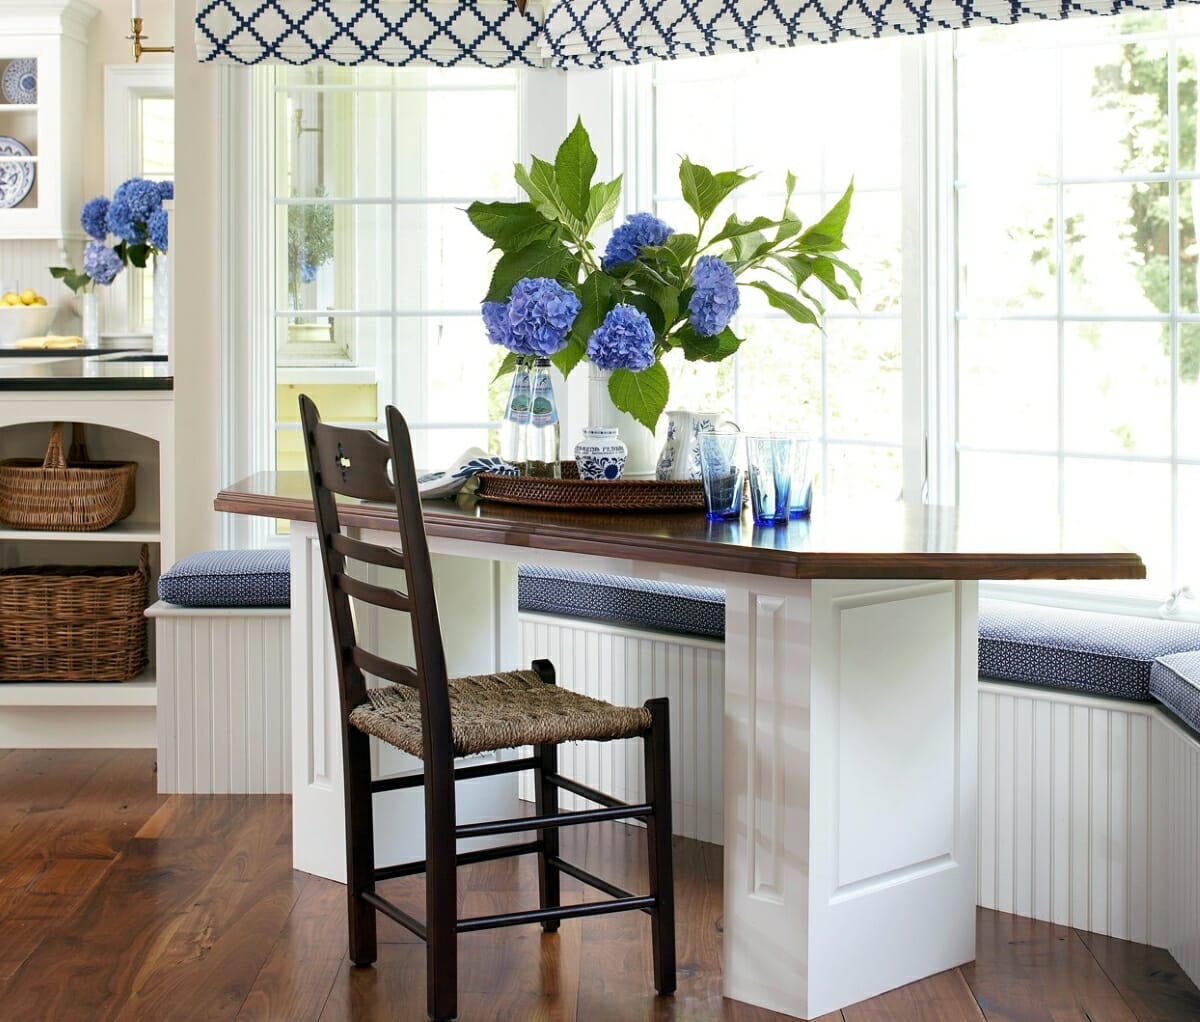 Kitchen nook ideas without a table